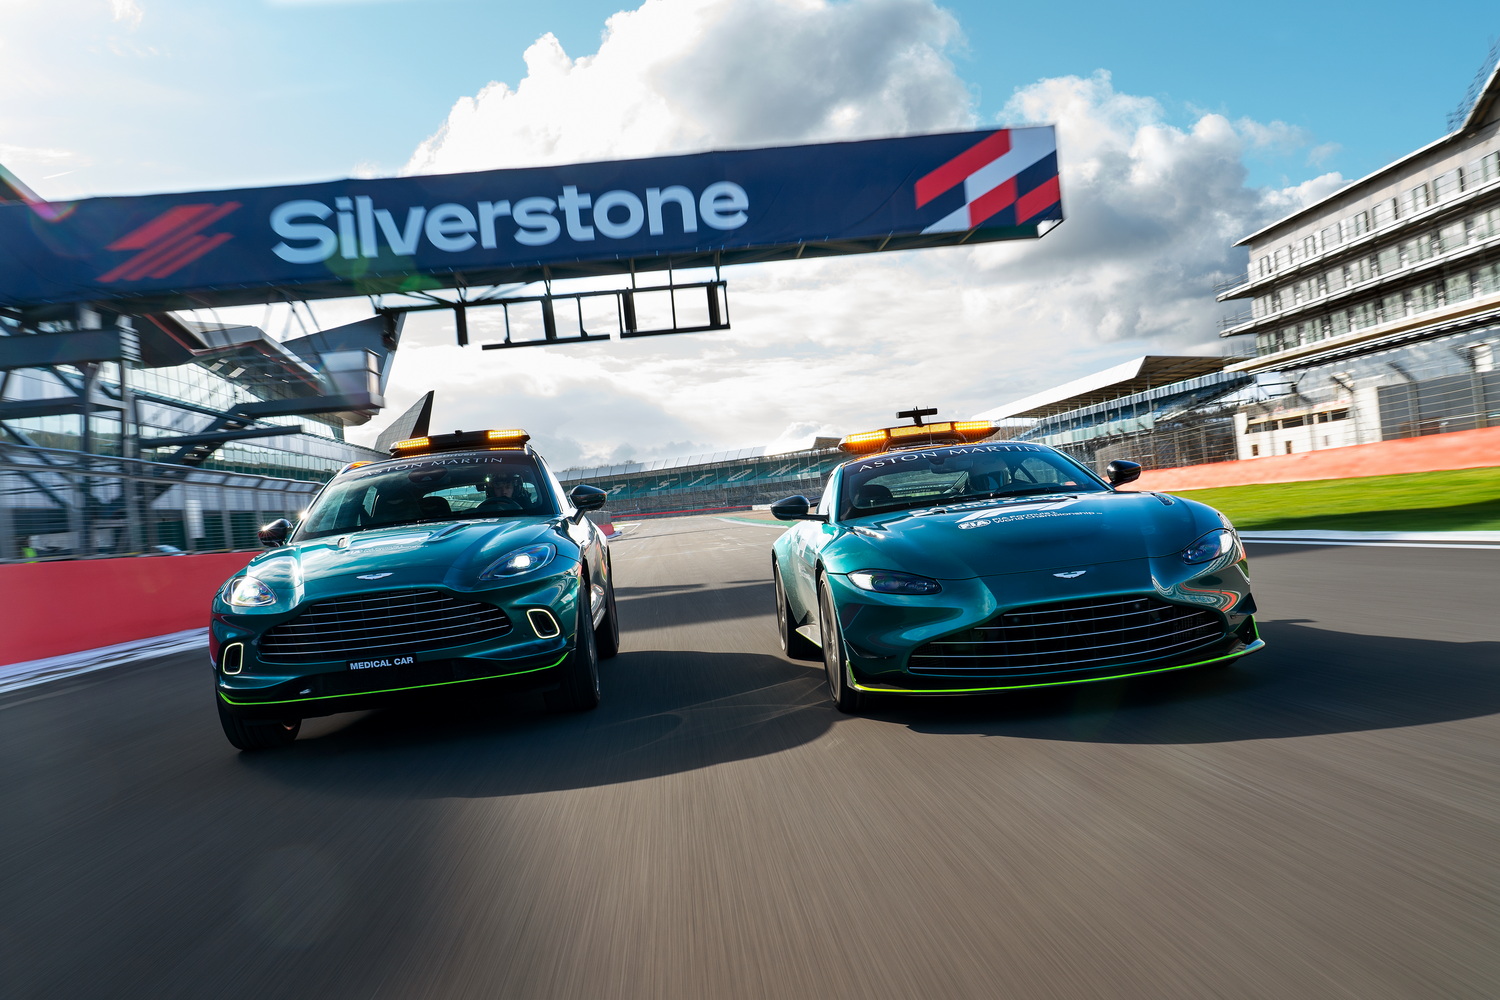 Aston Martin to cover F1 Safety and Medical Car duties. Image by Aston Martin.